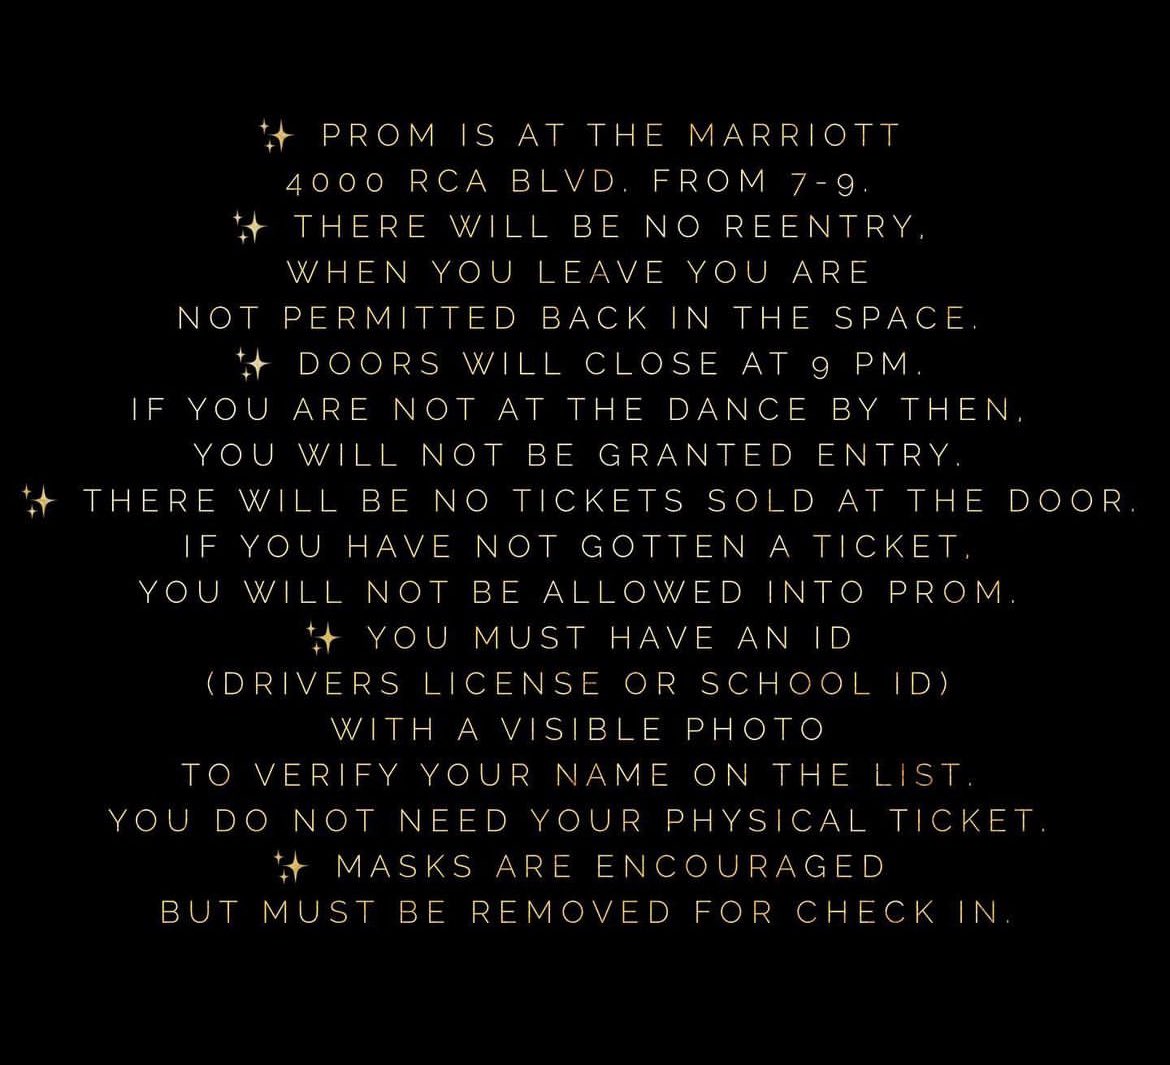 It’s PROM DAY! Please view the reminders to make for a smooth entry into the event. Remember - no entry after 9:00pm. Let’s make it a fun and safe night! #WeAreDwyer #Prom